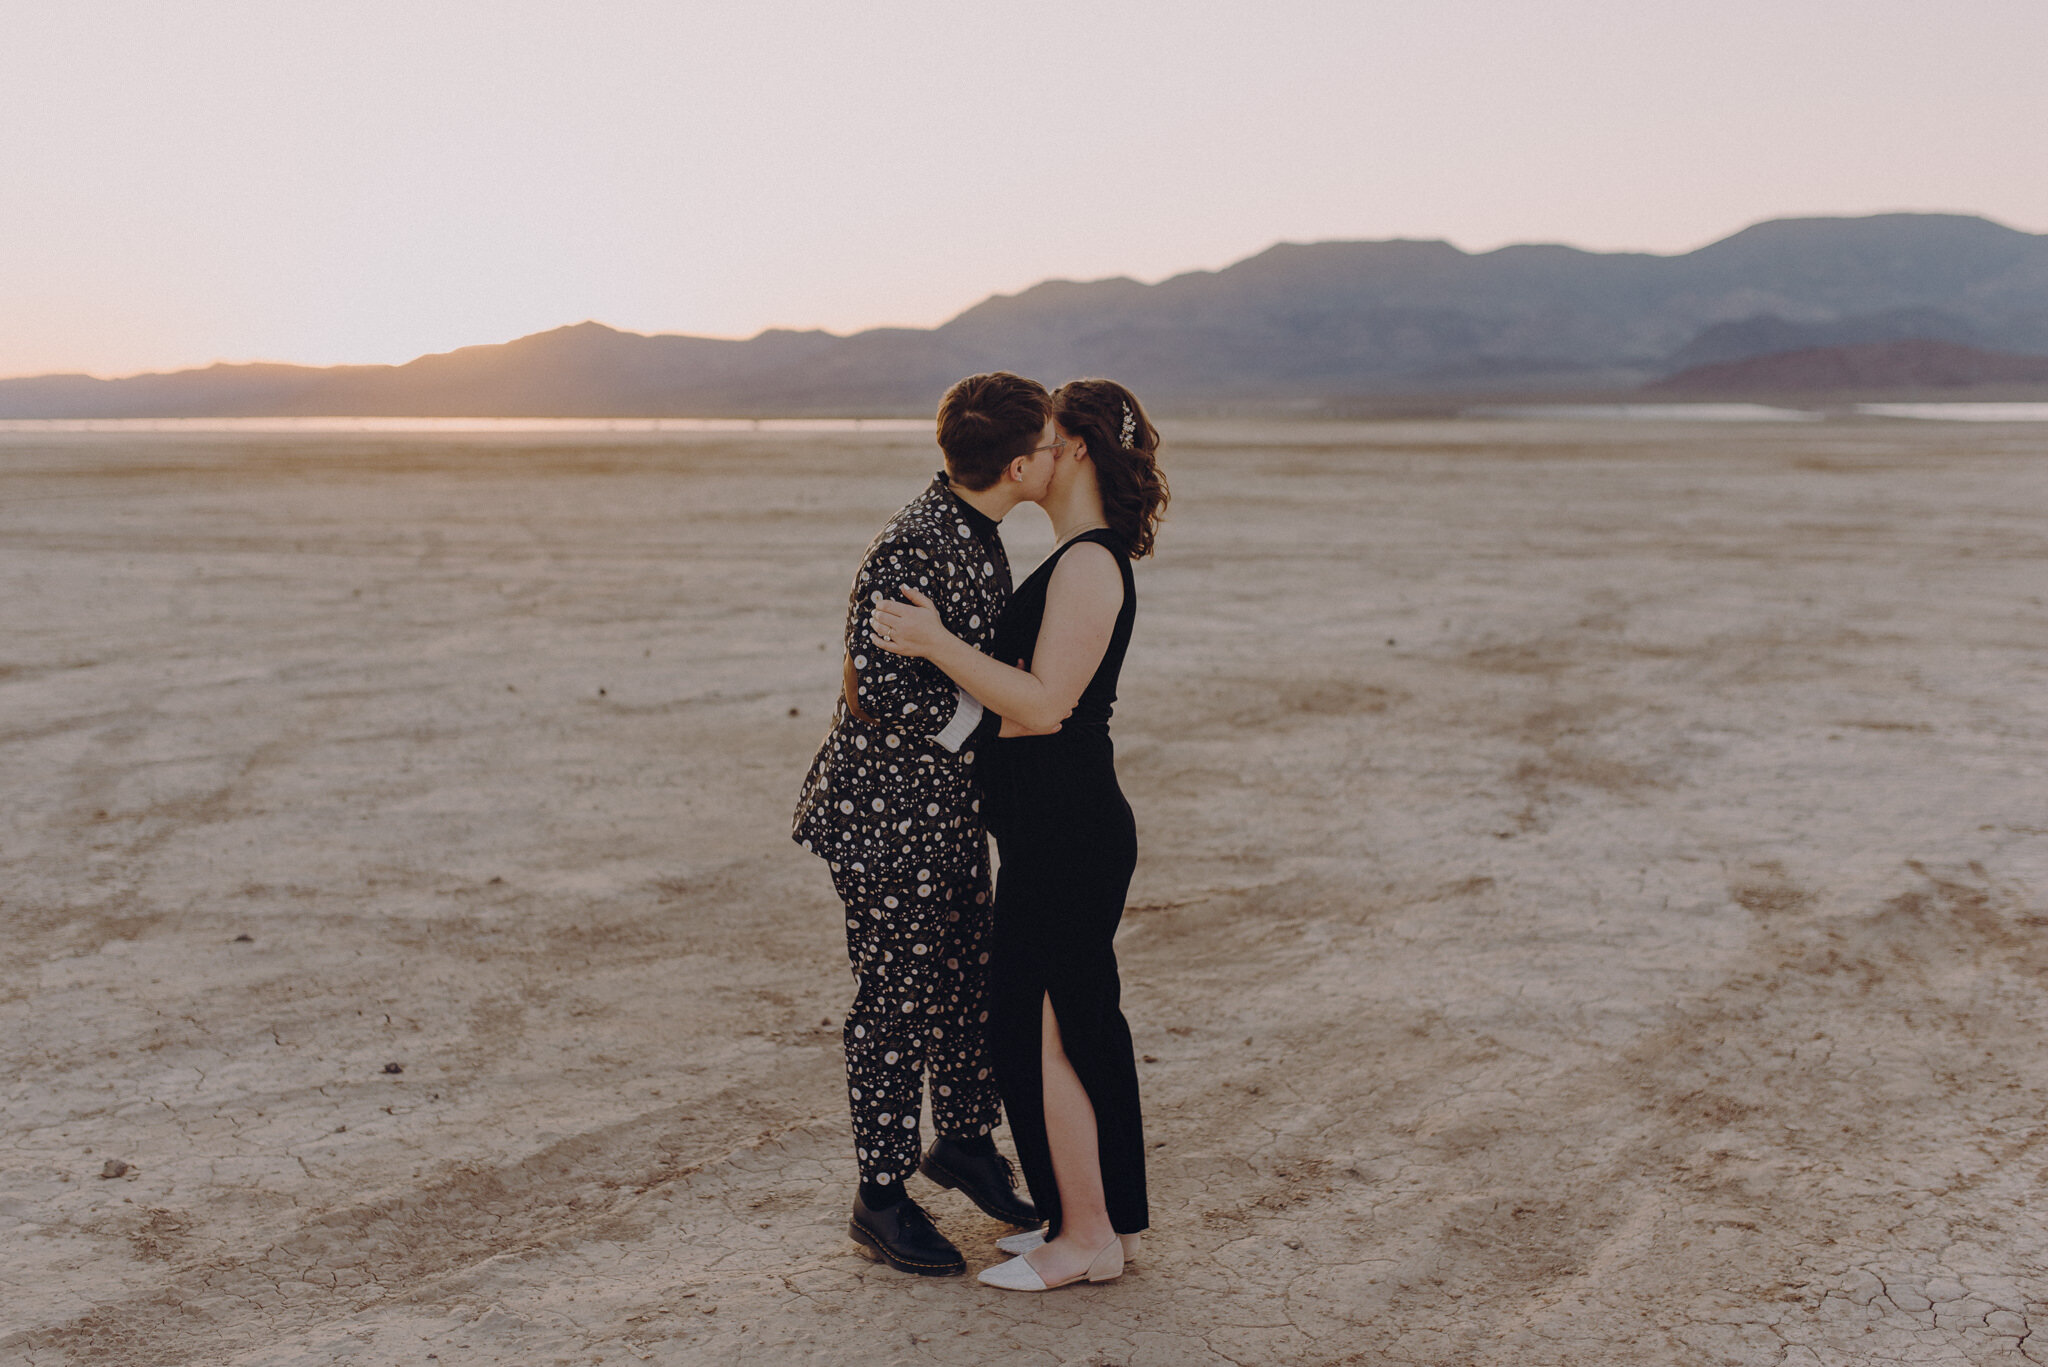 wedding photographer in los angeles - lgbtq wedding photographer - queer engagement session - isaiahandtaylor.com-012.jpg